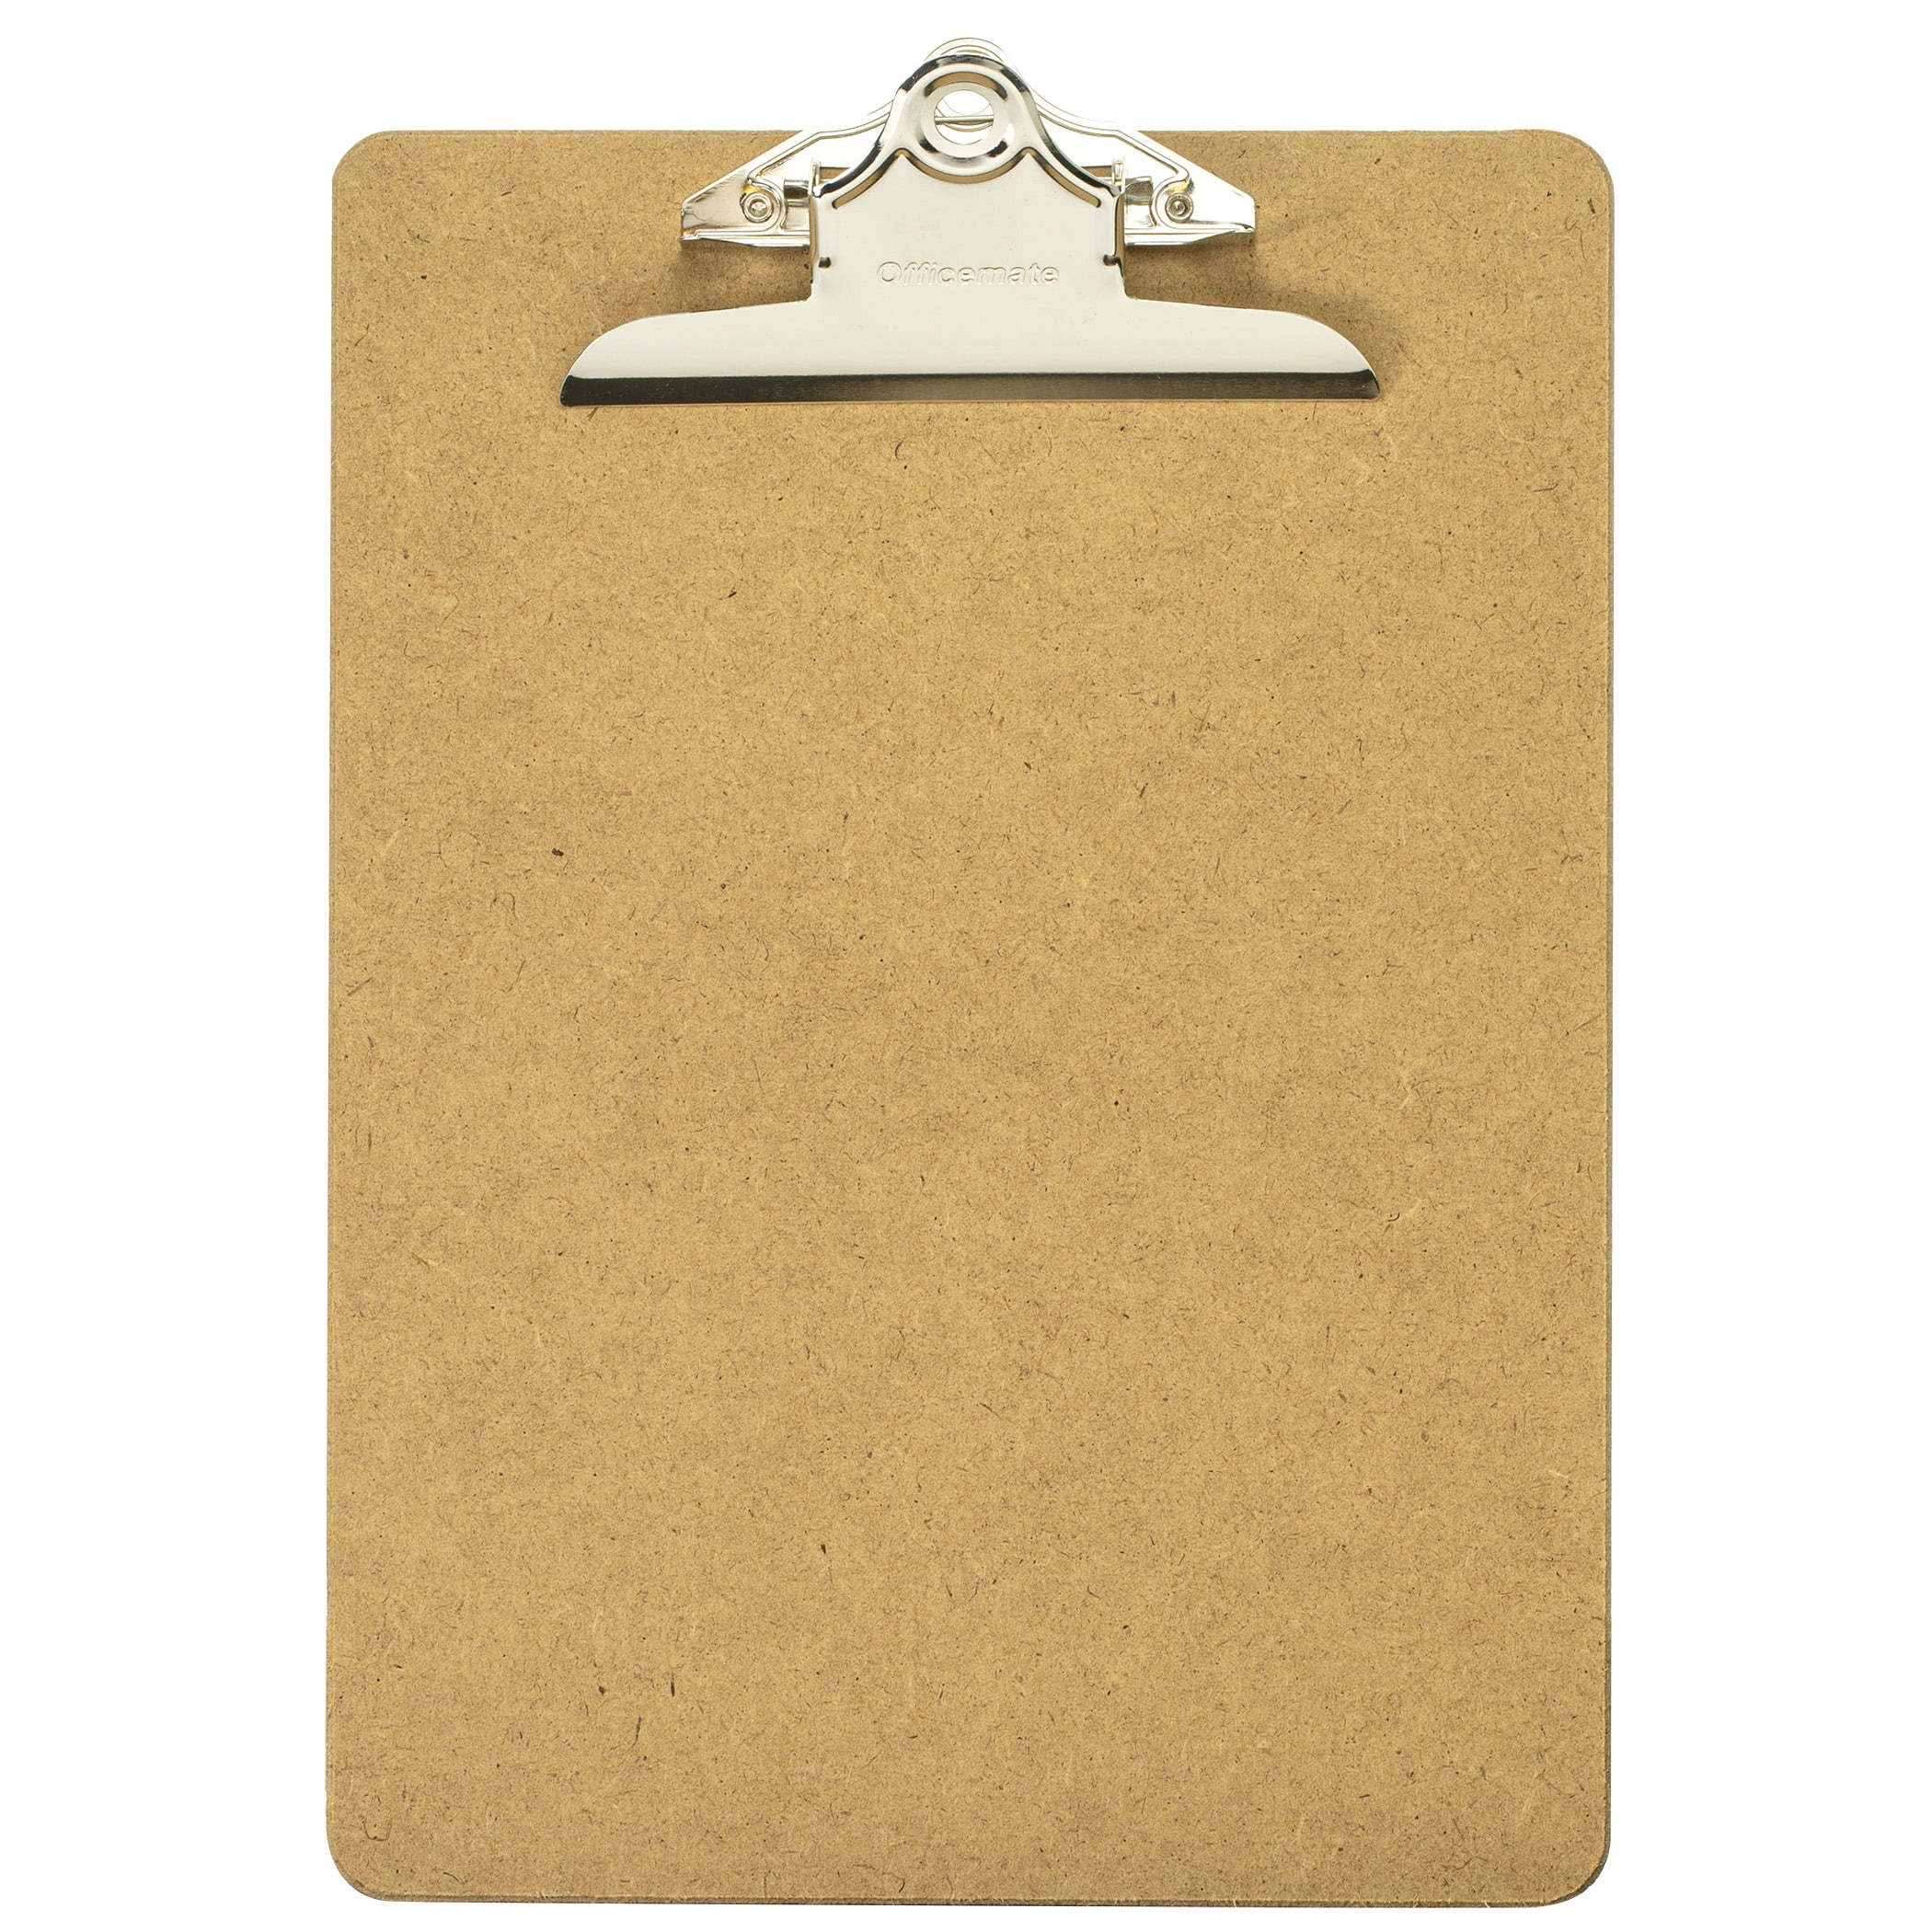 Clipboard Photo Holders (Set-6) - Iron Accents